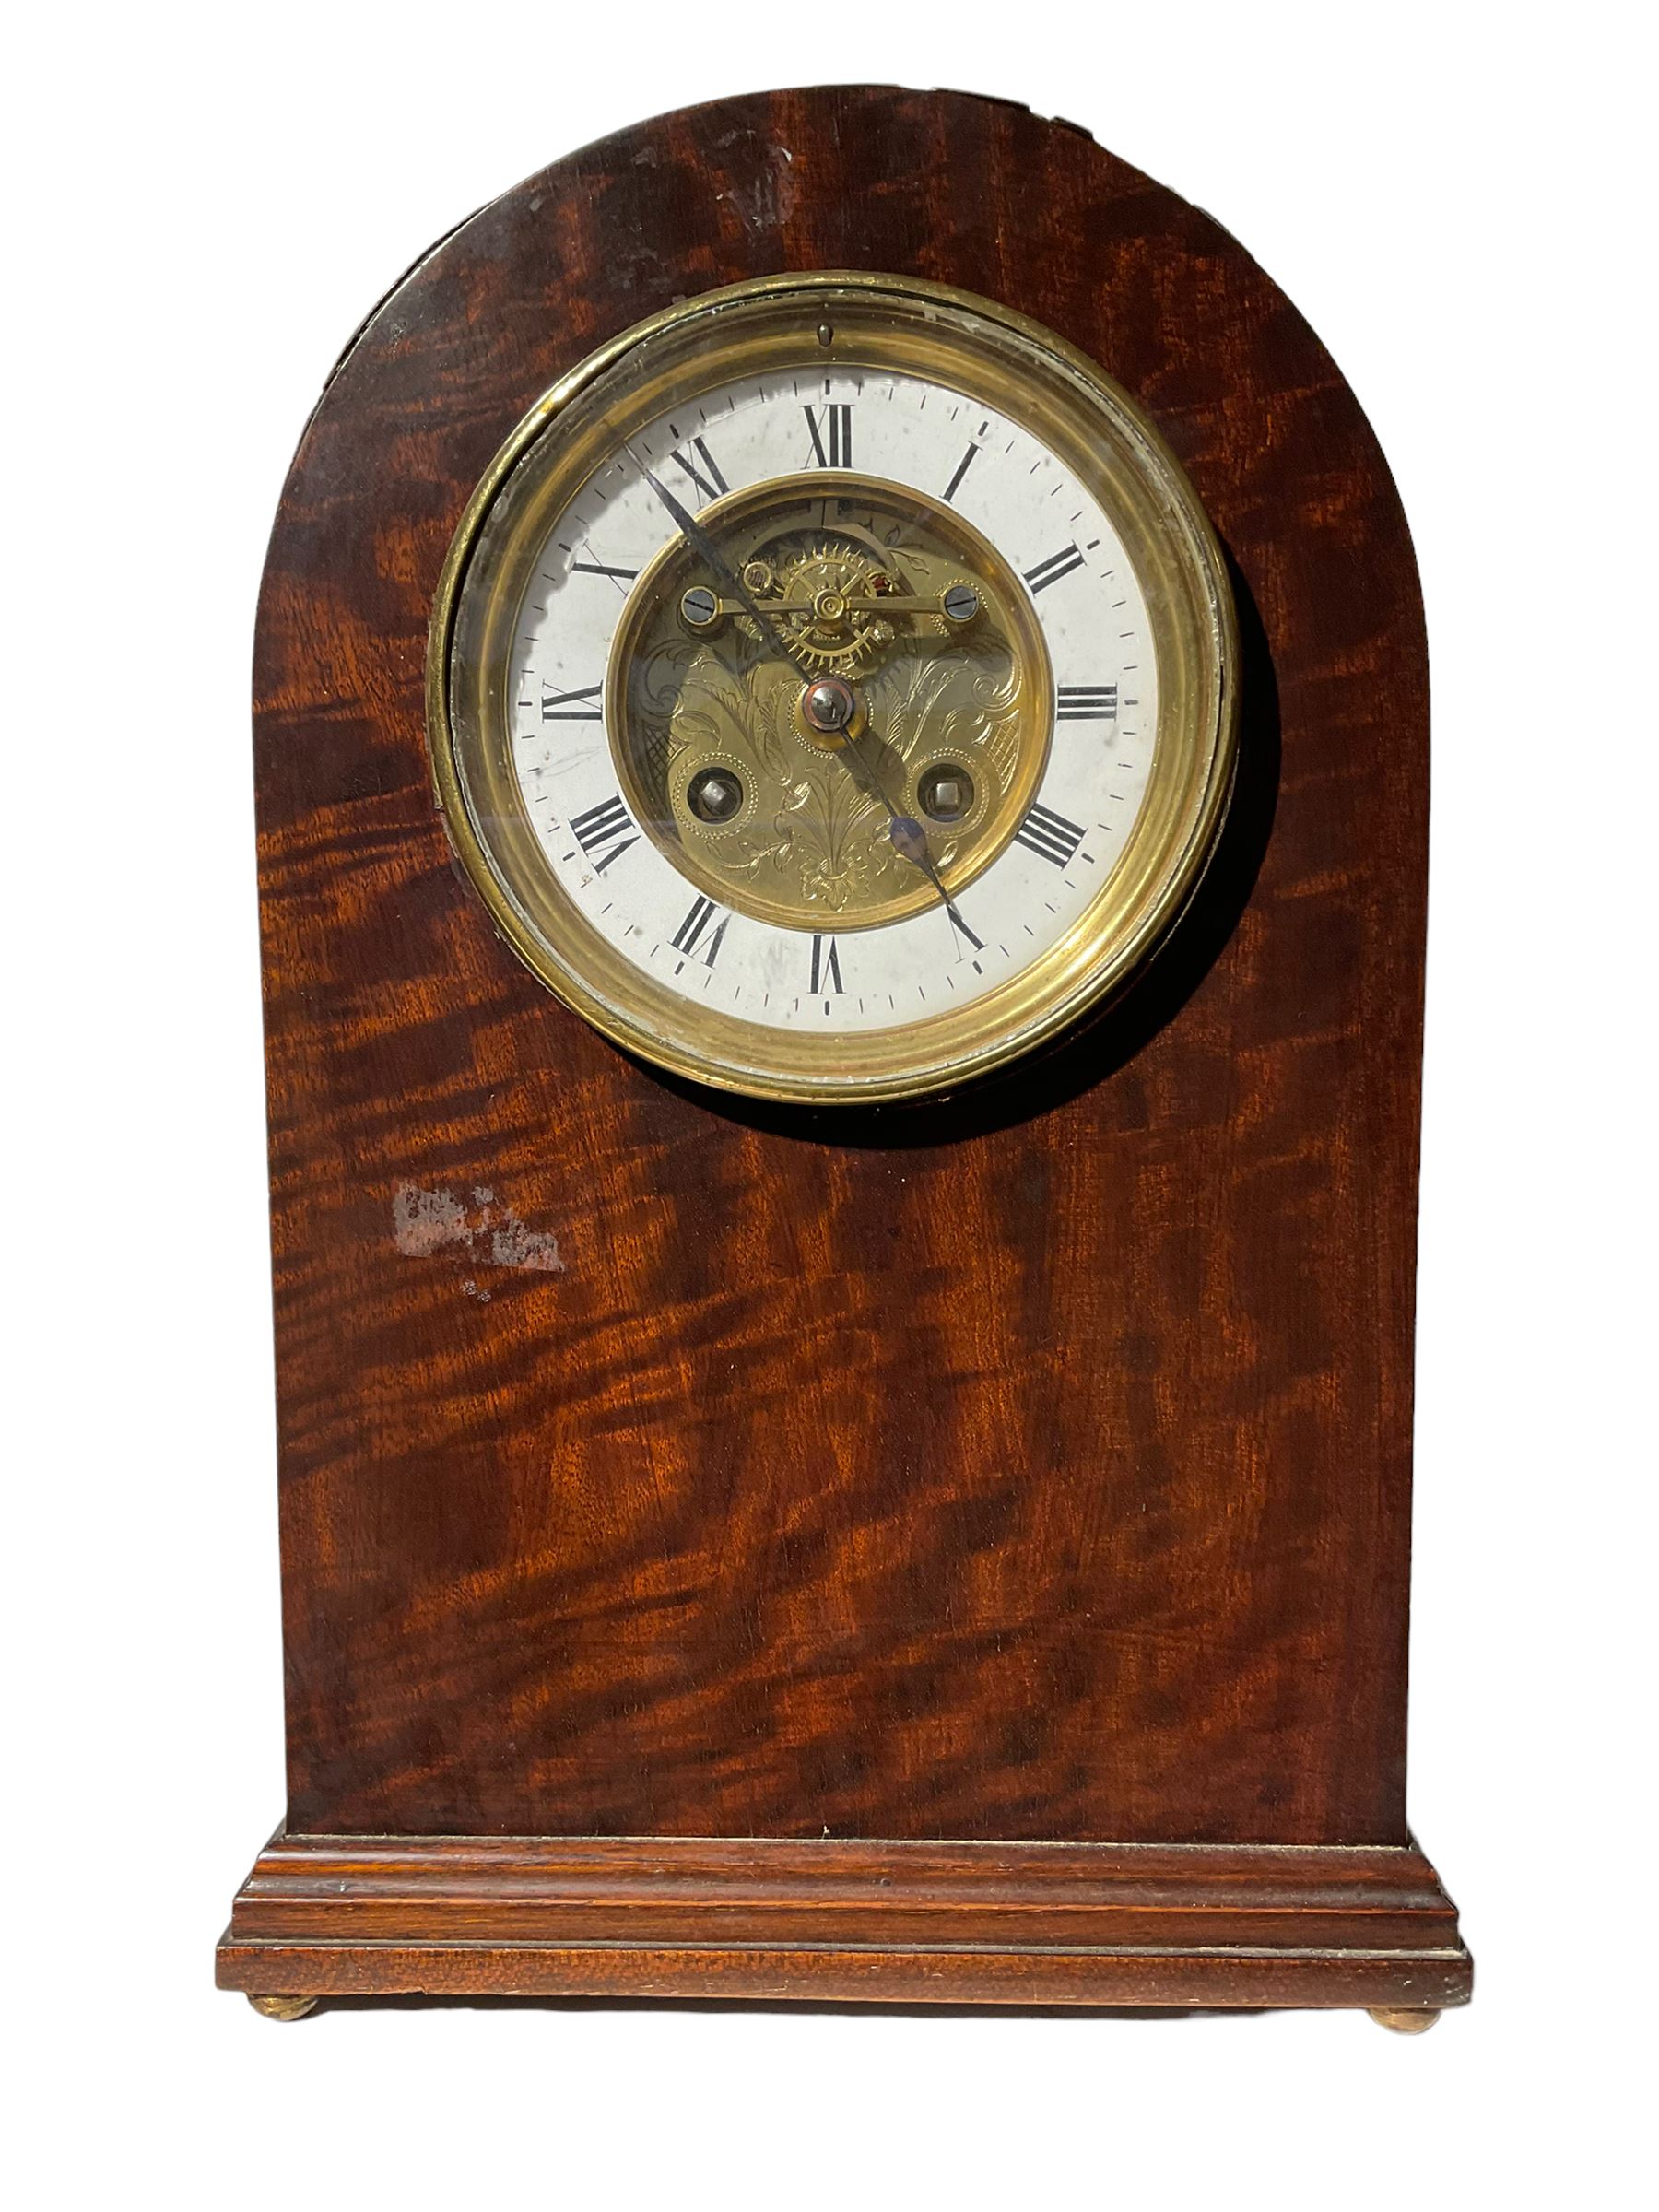 French - 8-day mantle clock in mahogany case circa 1900